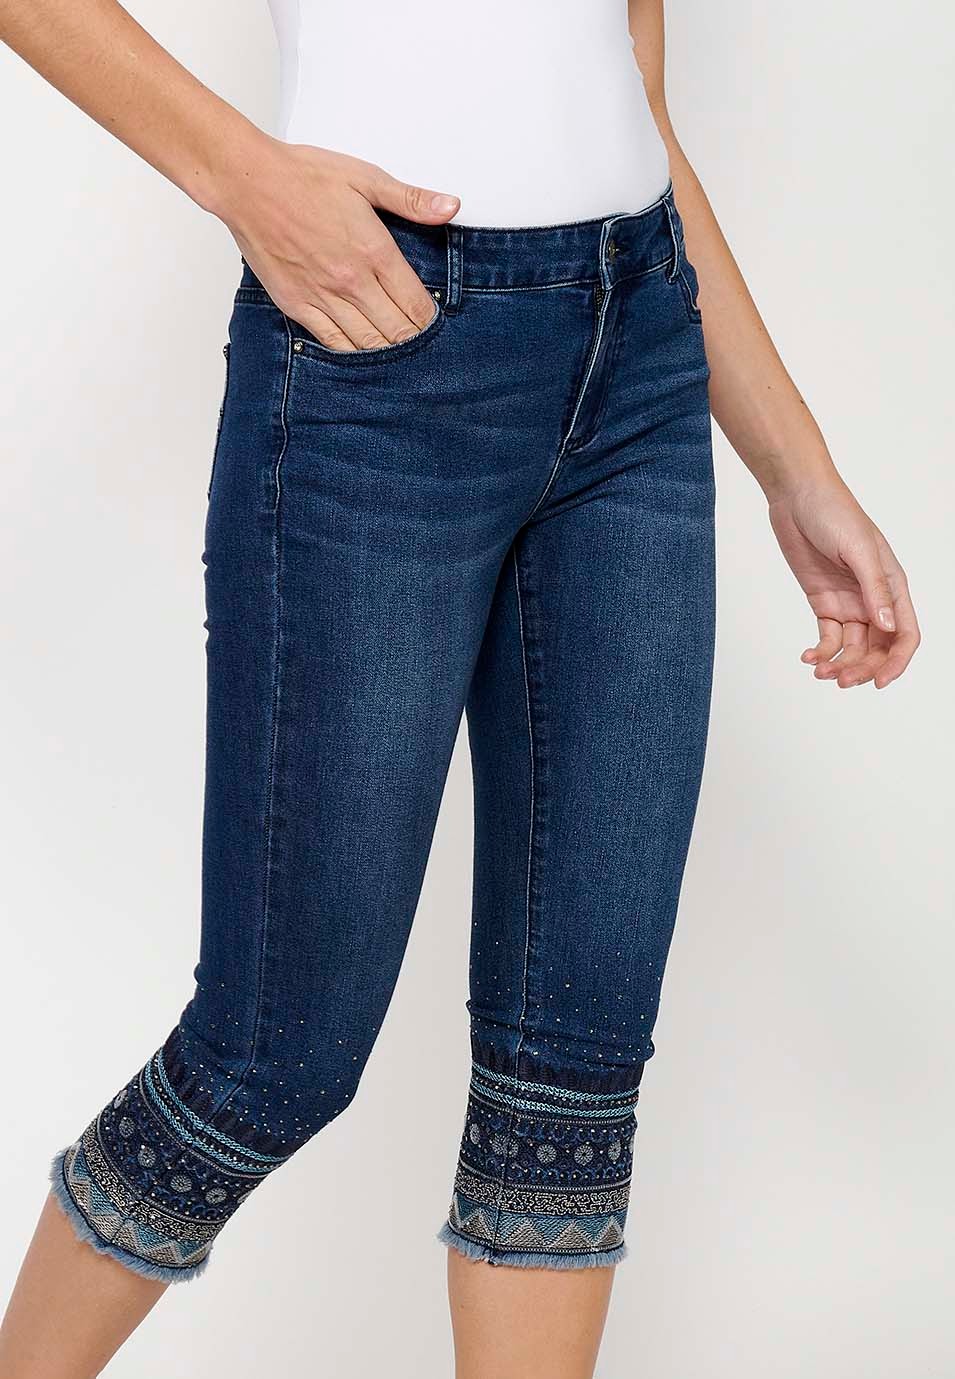 Pirate denim pants with embroidery finish and front zipper closure in Blue for Women 2